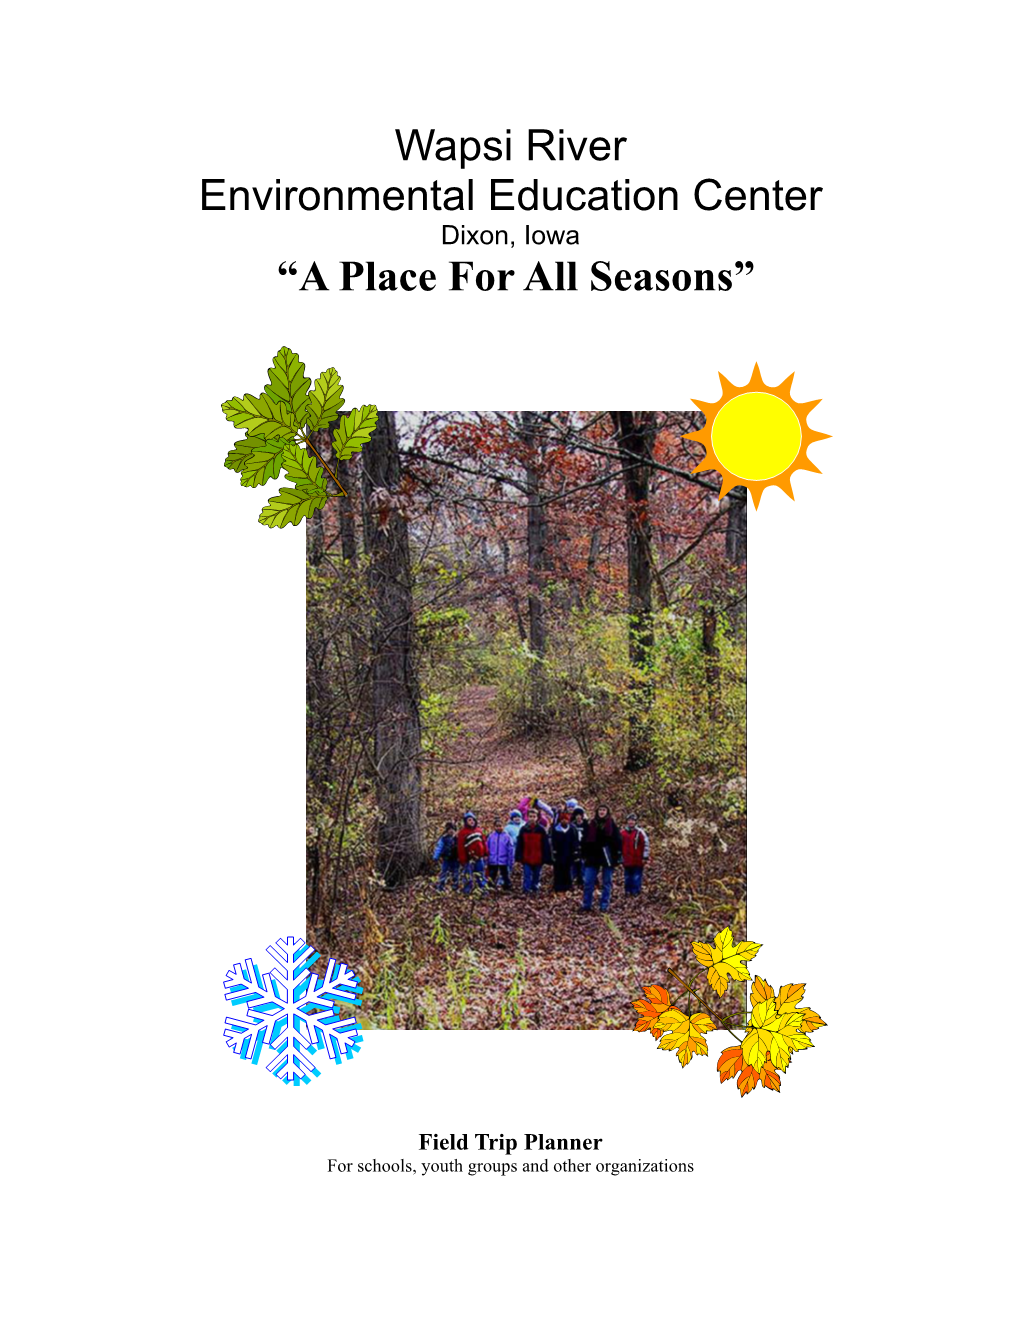 Wapsi River Environmental Education Center “A Place for All Seasons”